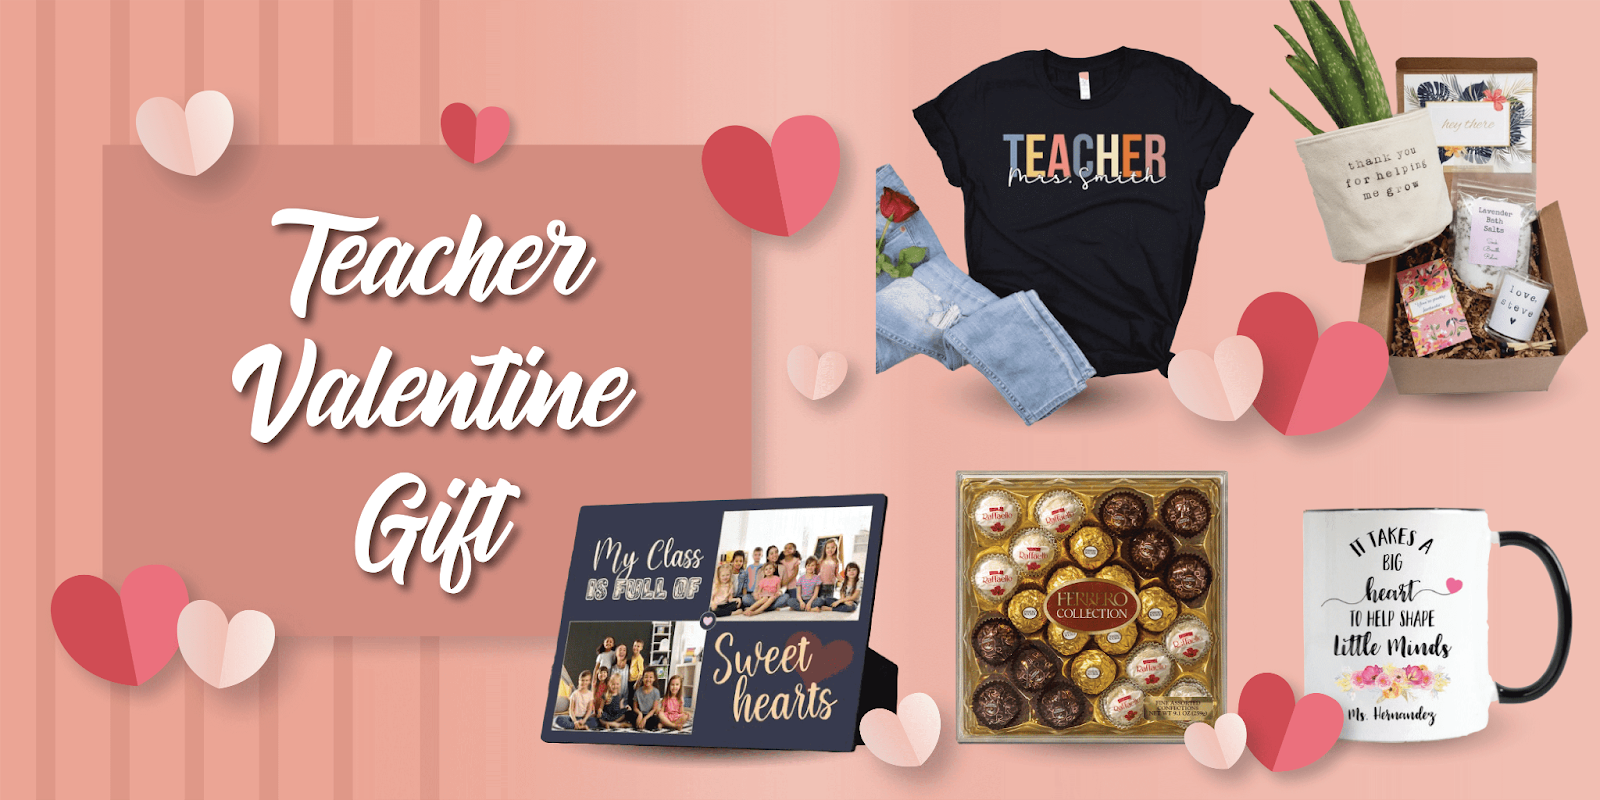 What's the Significance behind Gifting Teachers on Valentine's Day?